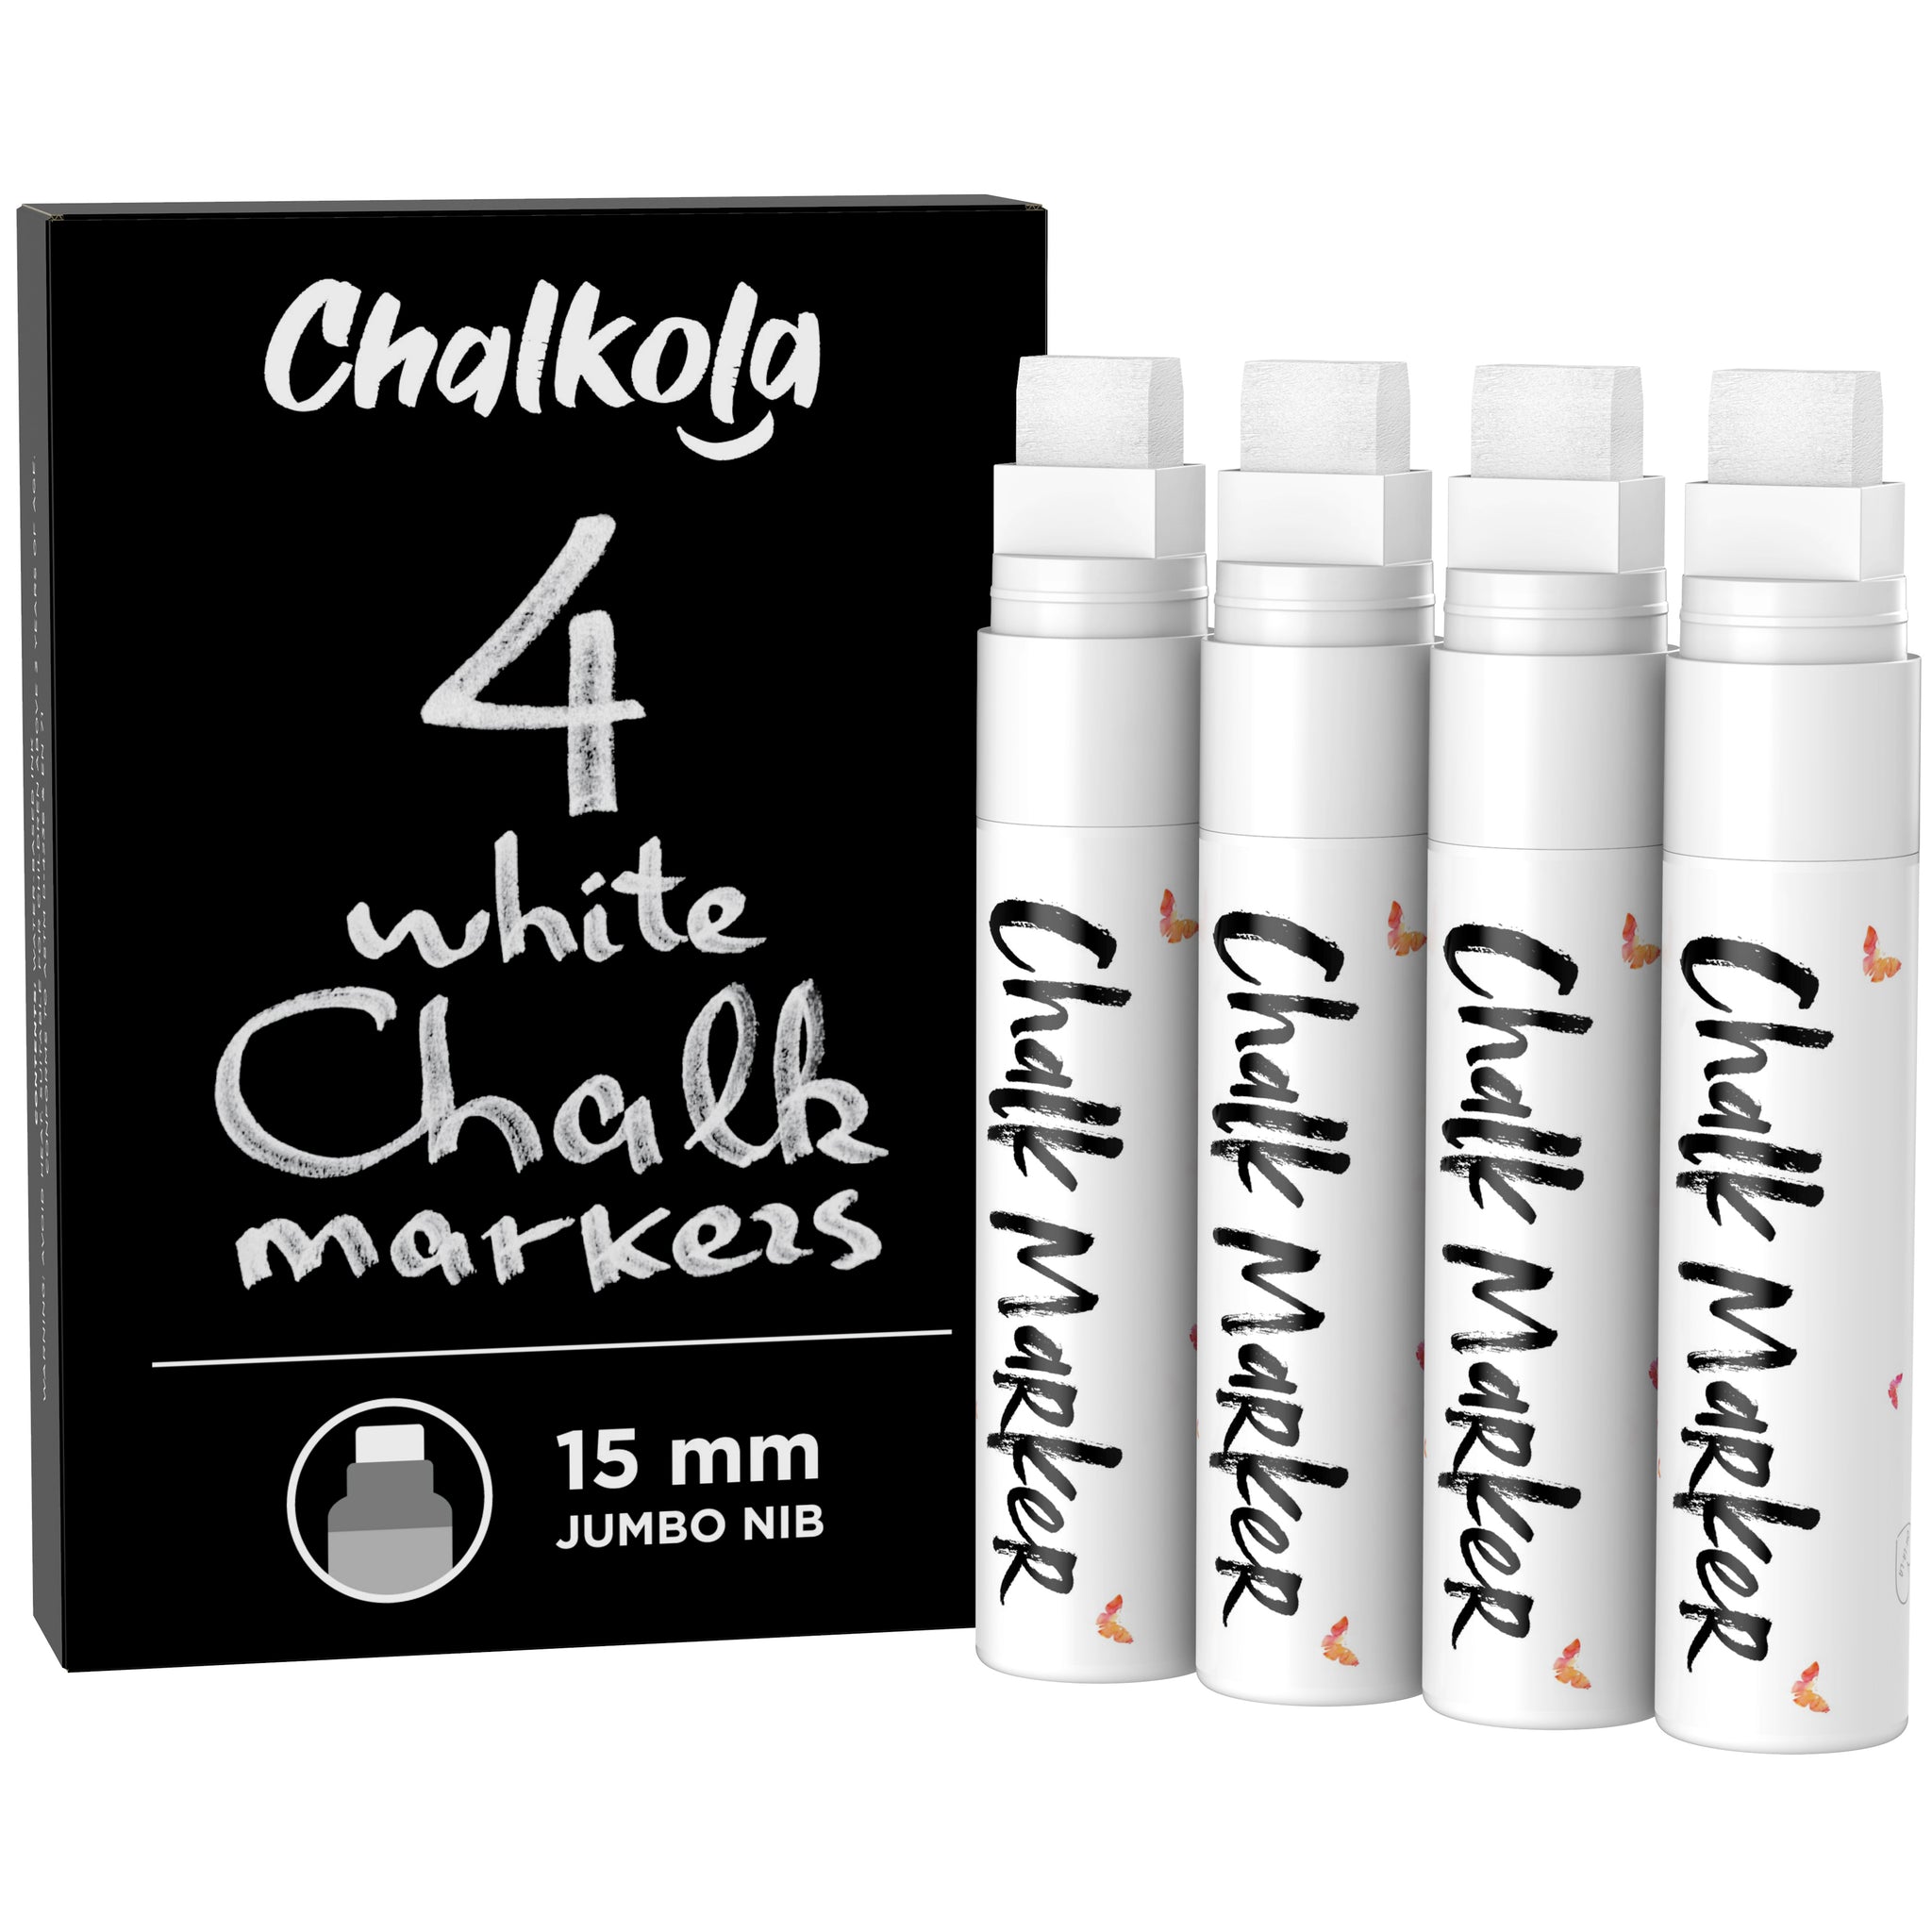 Great White Chalk With Dust Cap